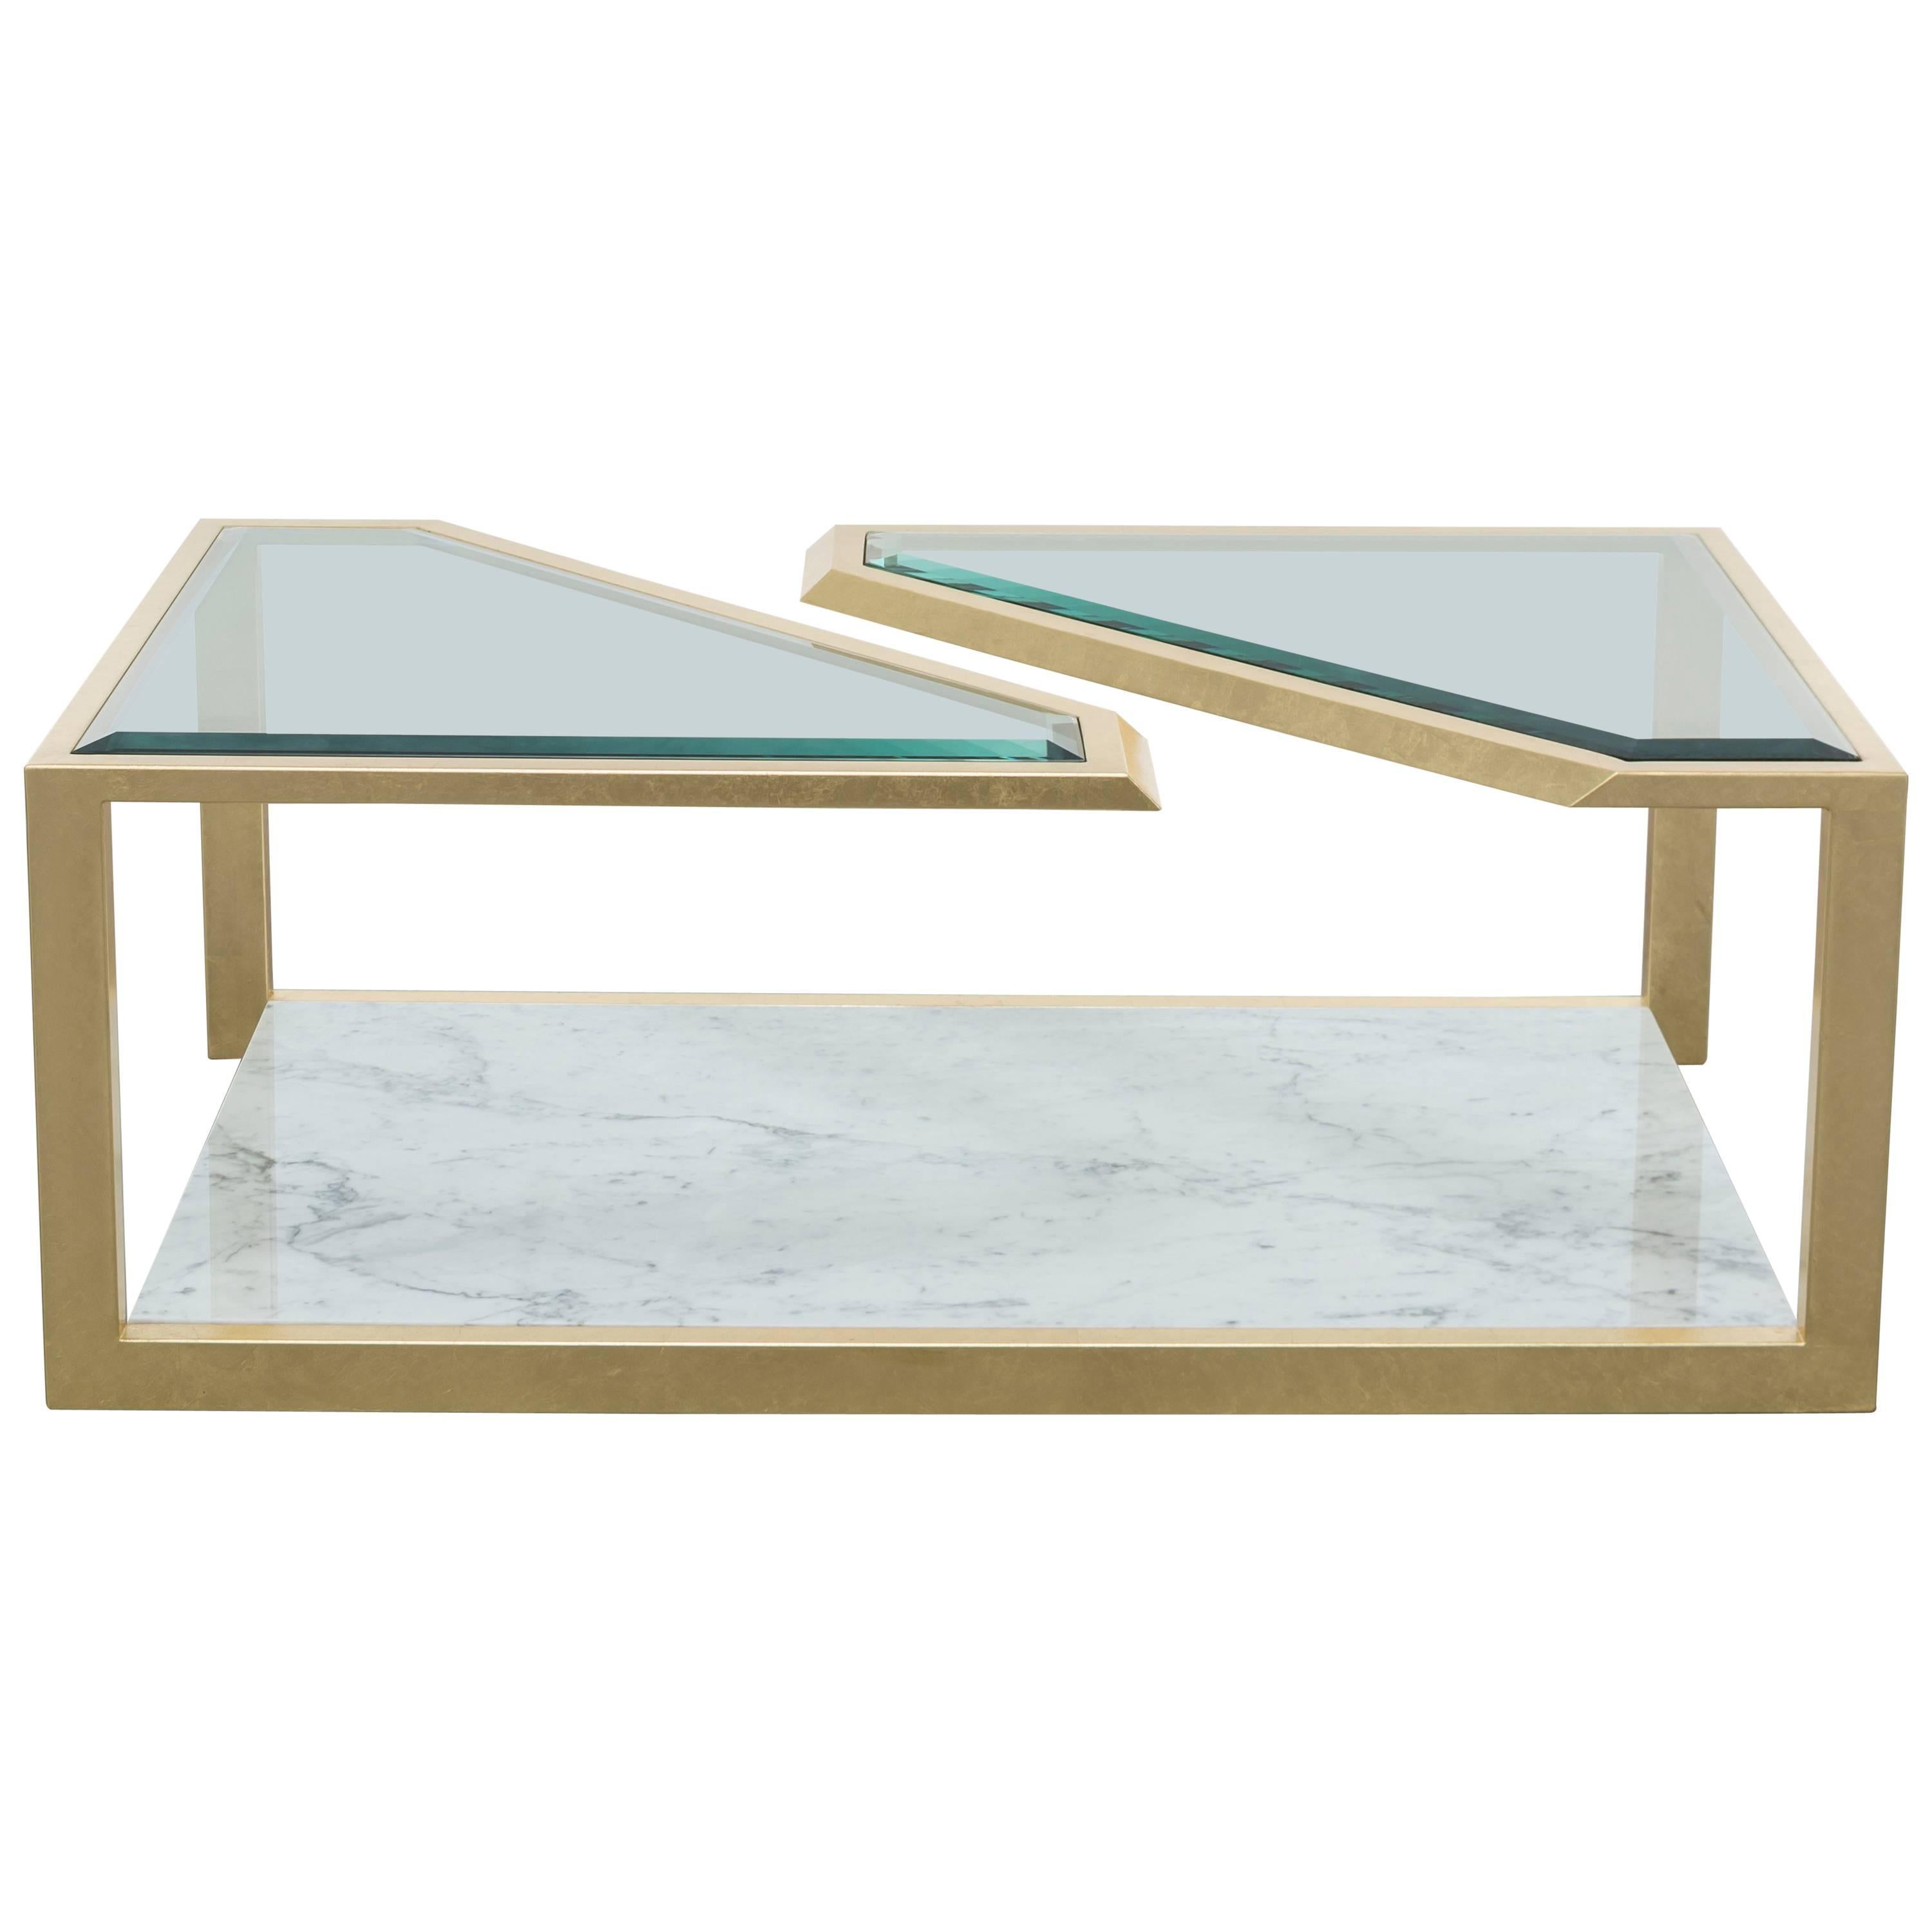 PIERRE COFFEE TABLE - Modern Carrara Marble with Gold Leaf and Beveled Glass